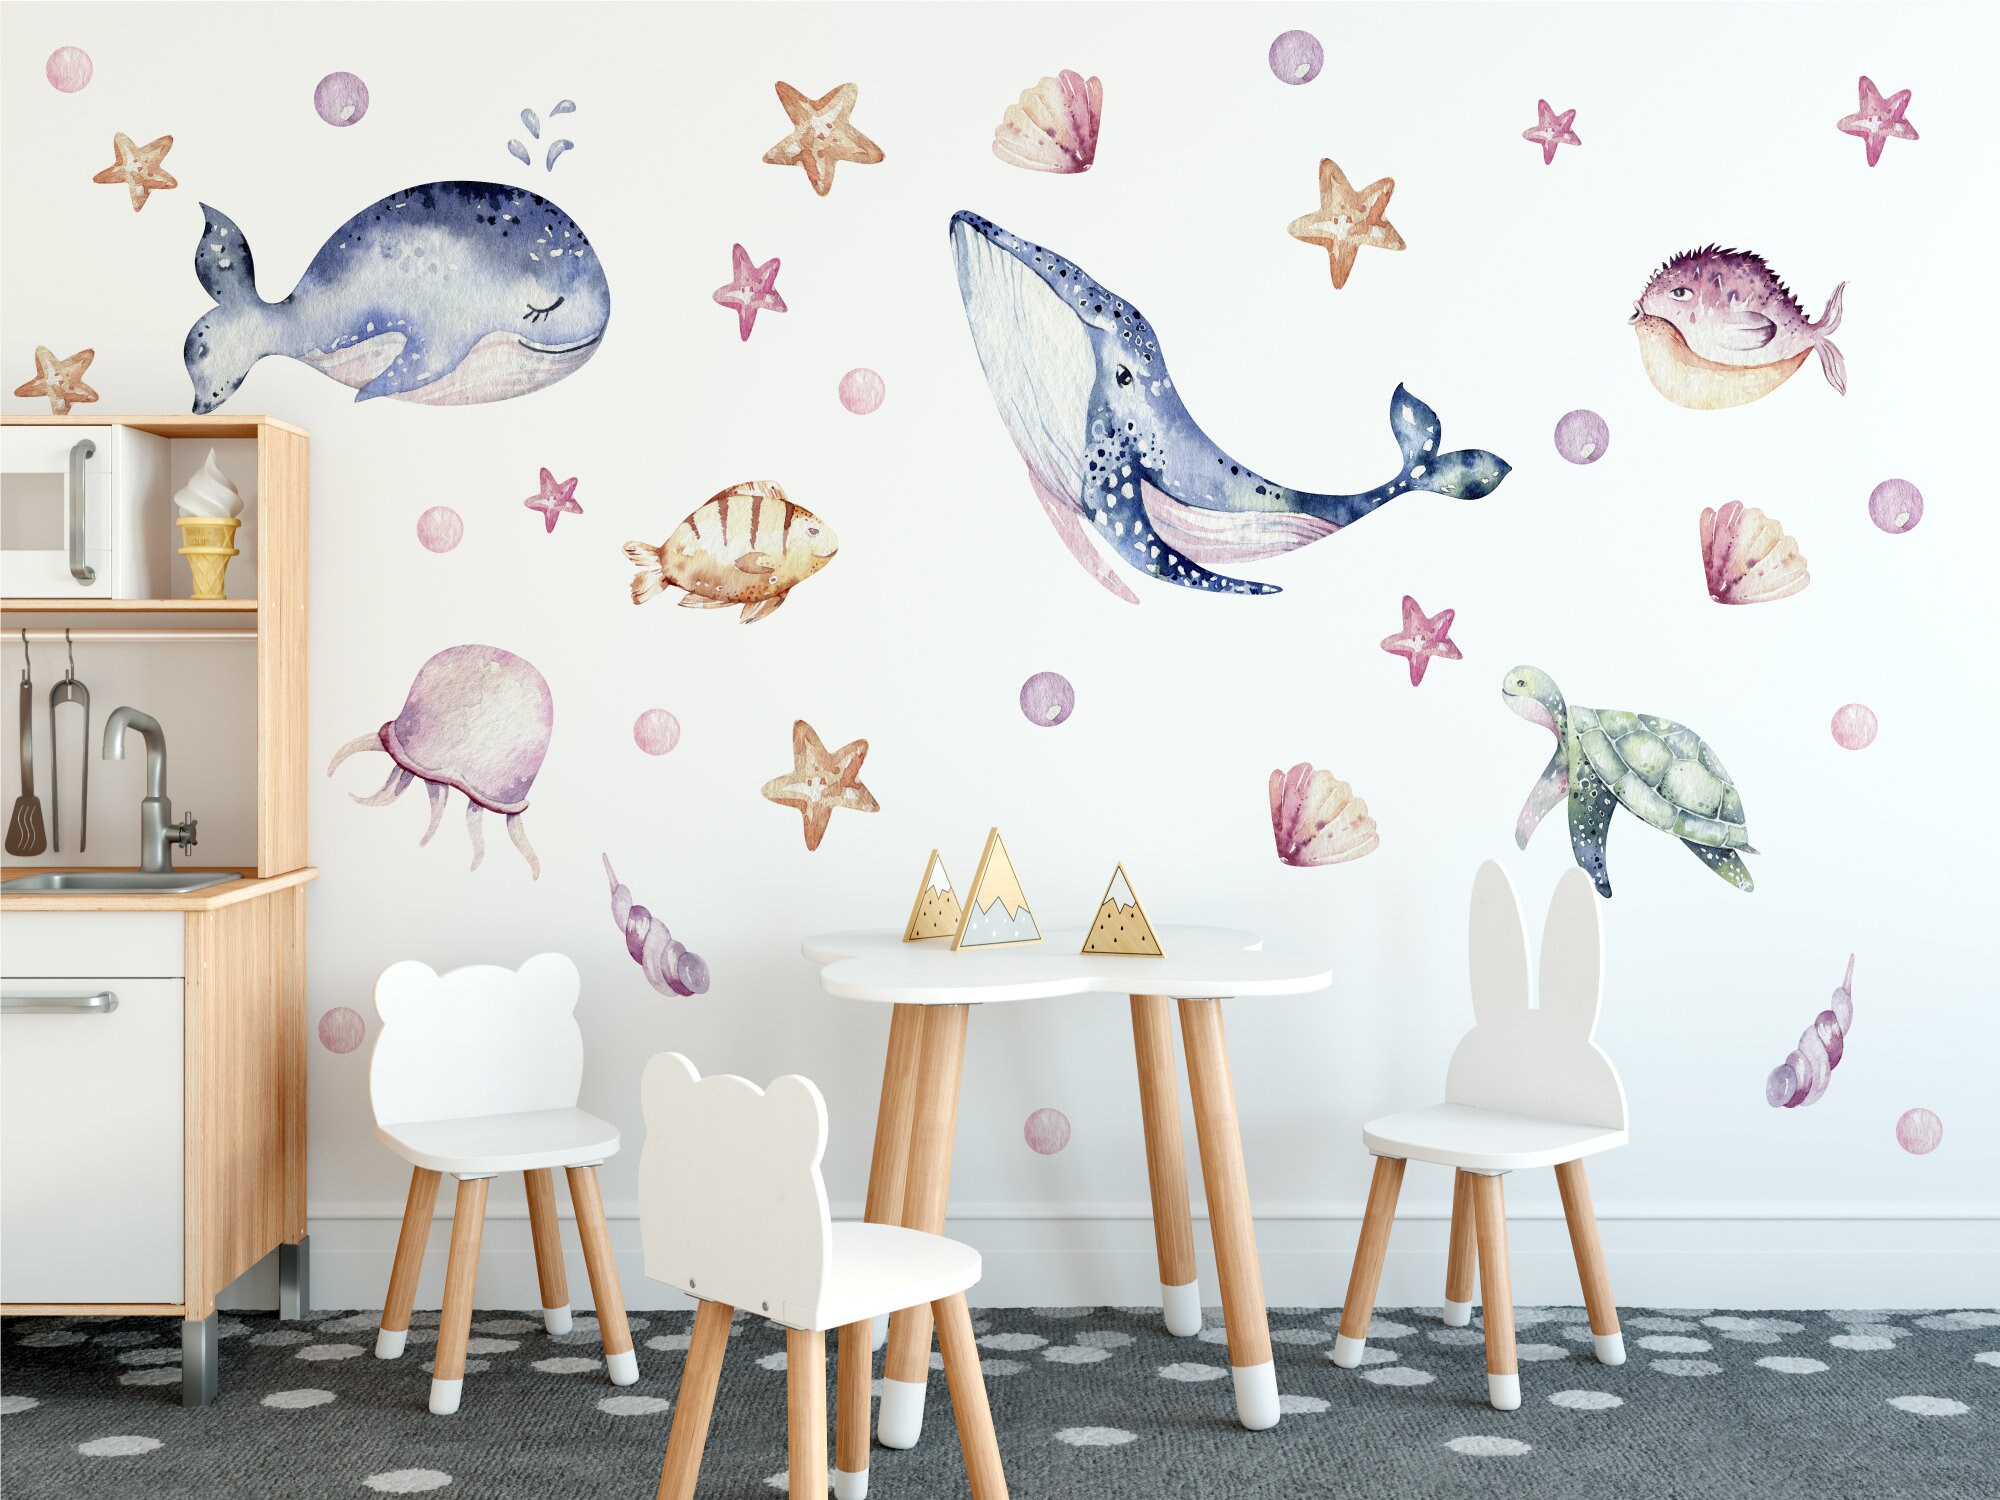 Dolphin Turtle Fishes Sea Wall Art Sticker Mural Decal Kids Room Home Decor BG4 